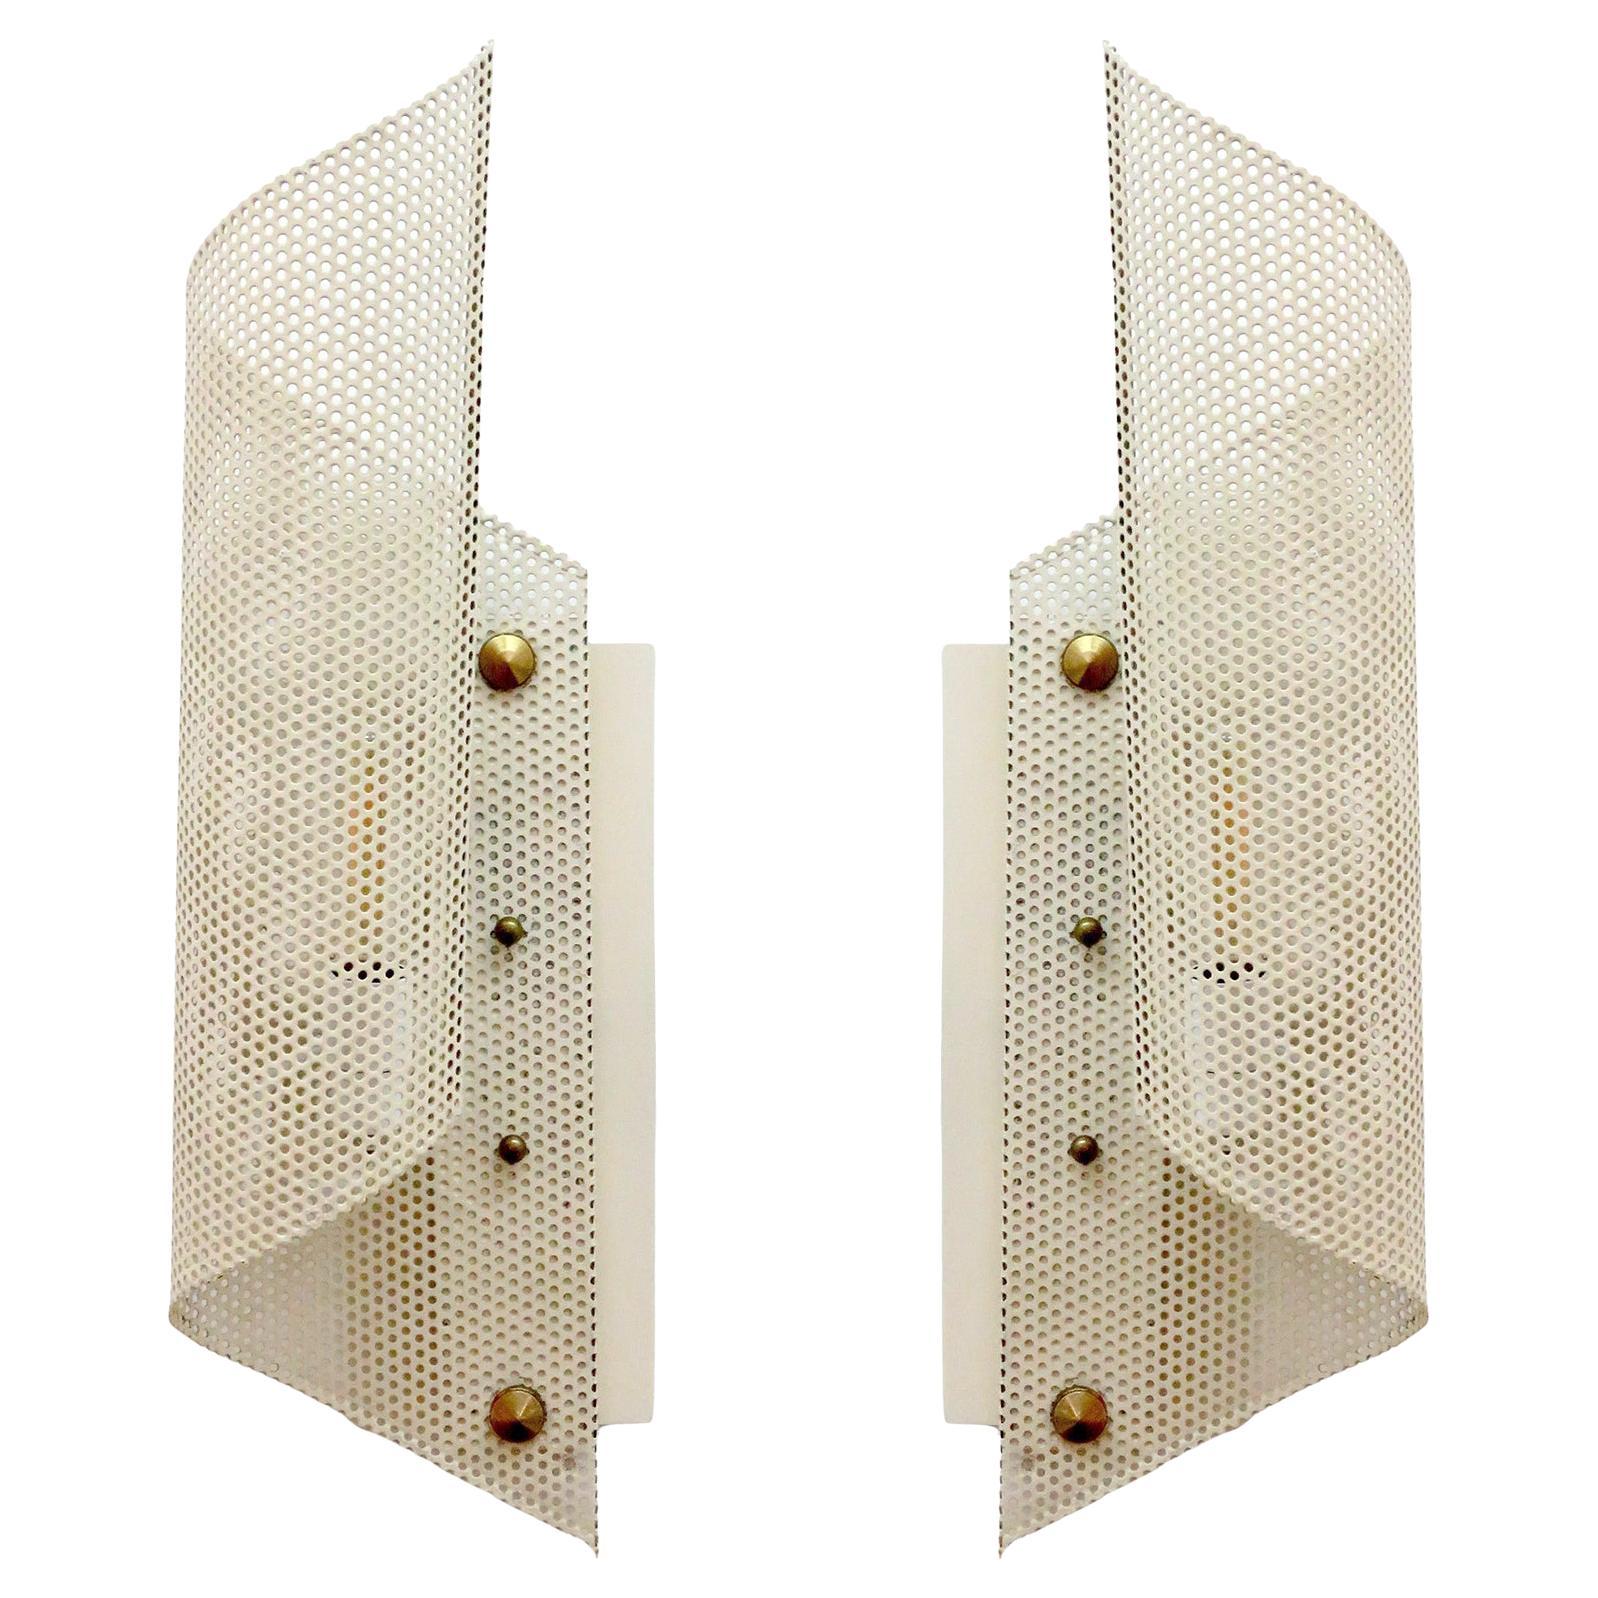 Pair of French Perforated Wall Lights by Lunel, 1950 For Sale